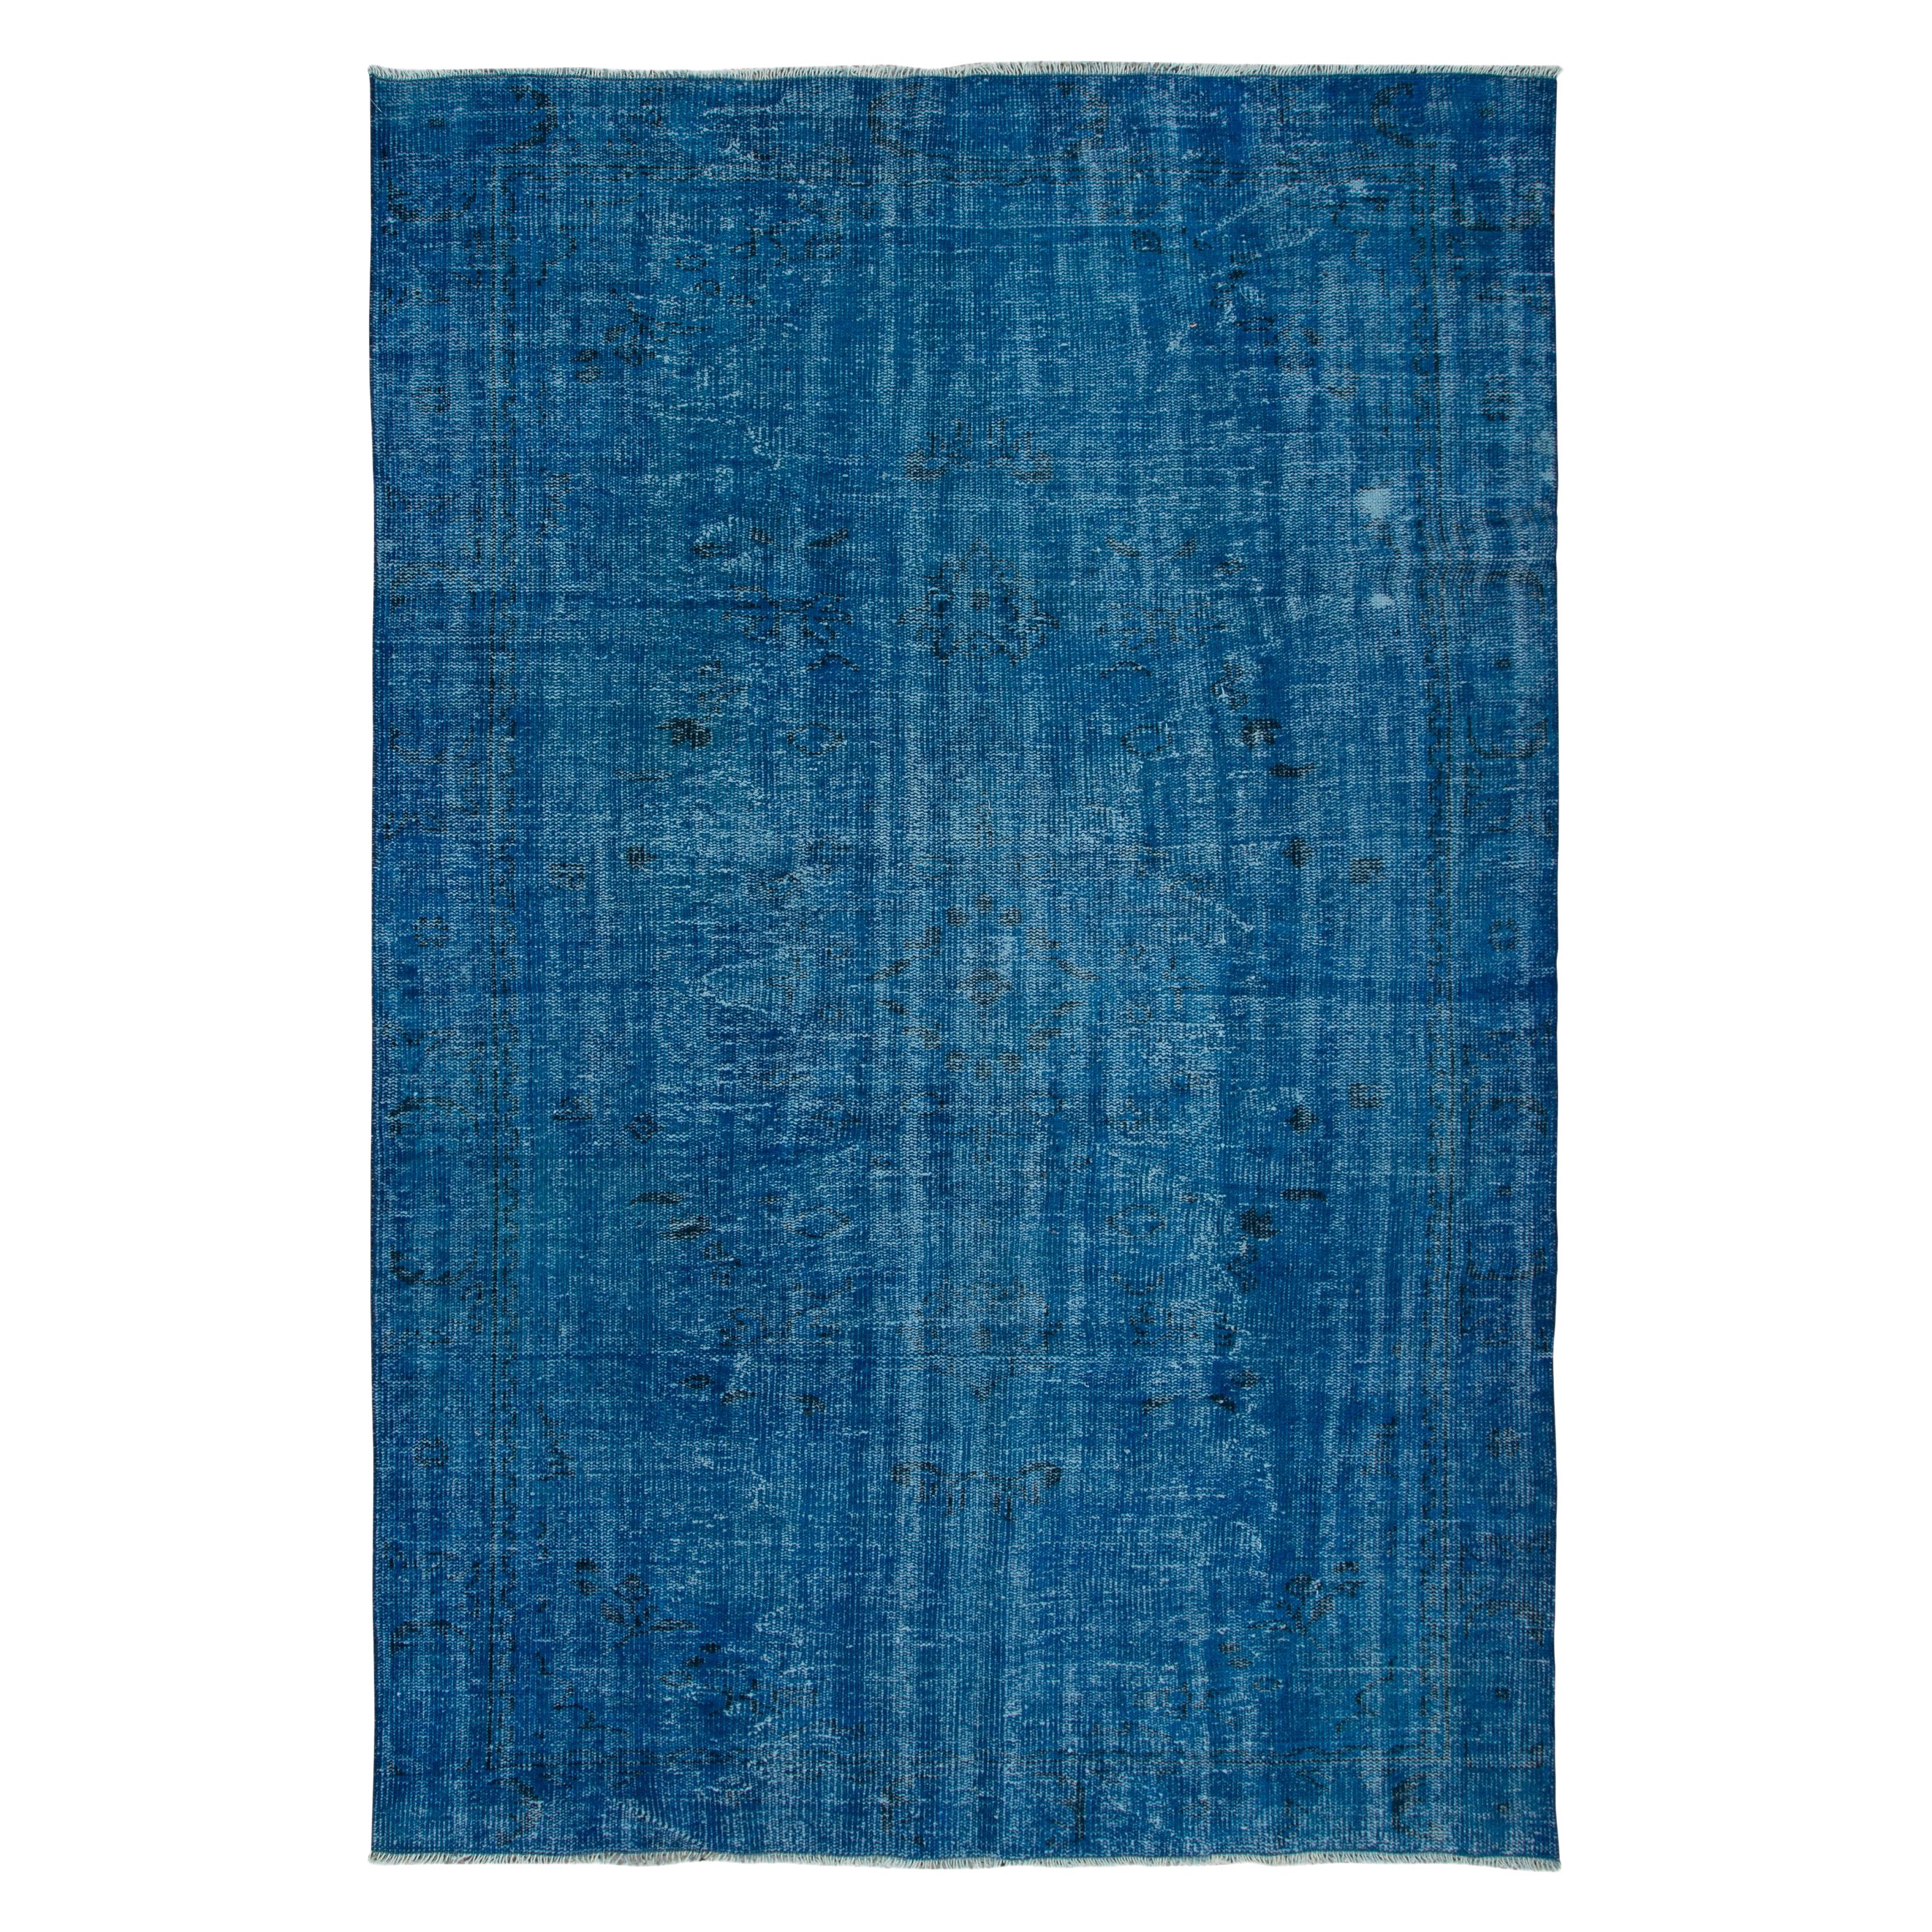 6x8.8 Ft Traditional Handmade Area Rug in Blue, Modern Turkish Redyed Carpet